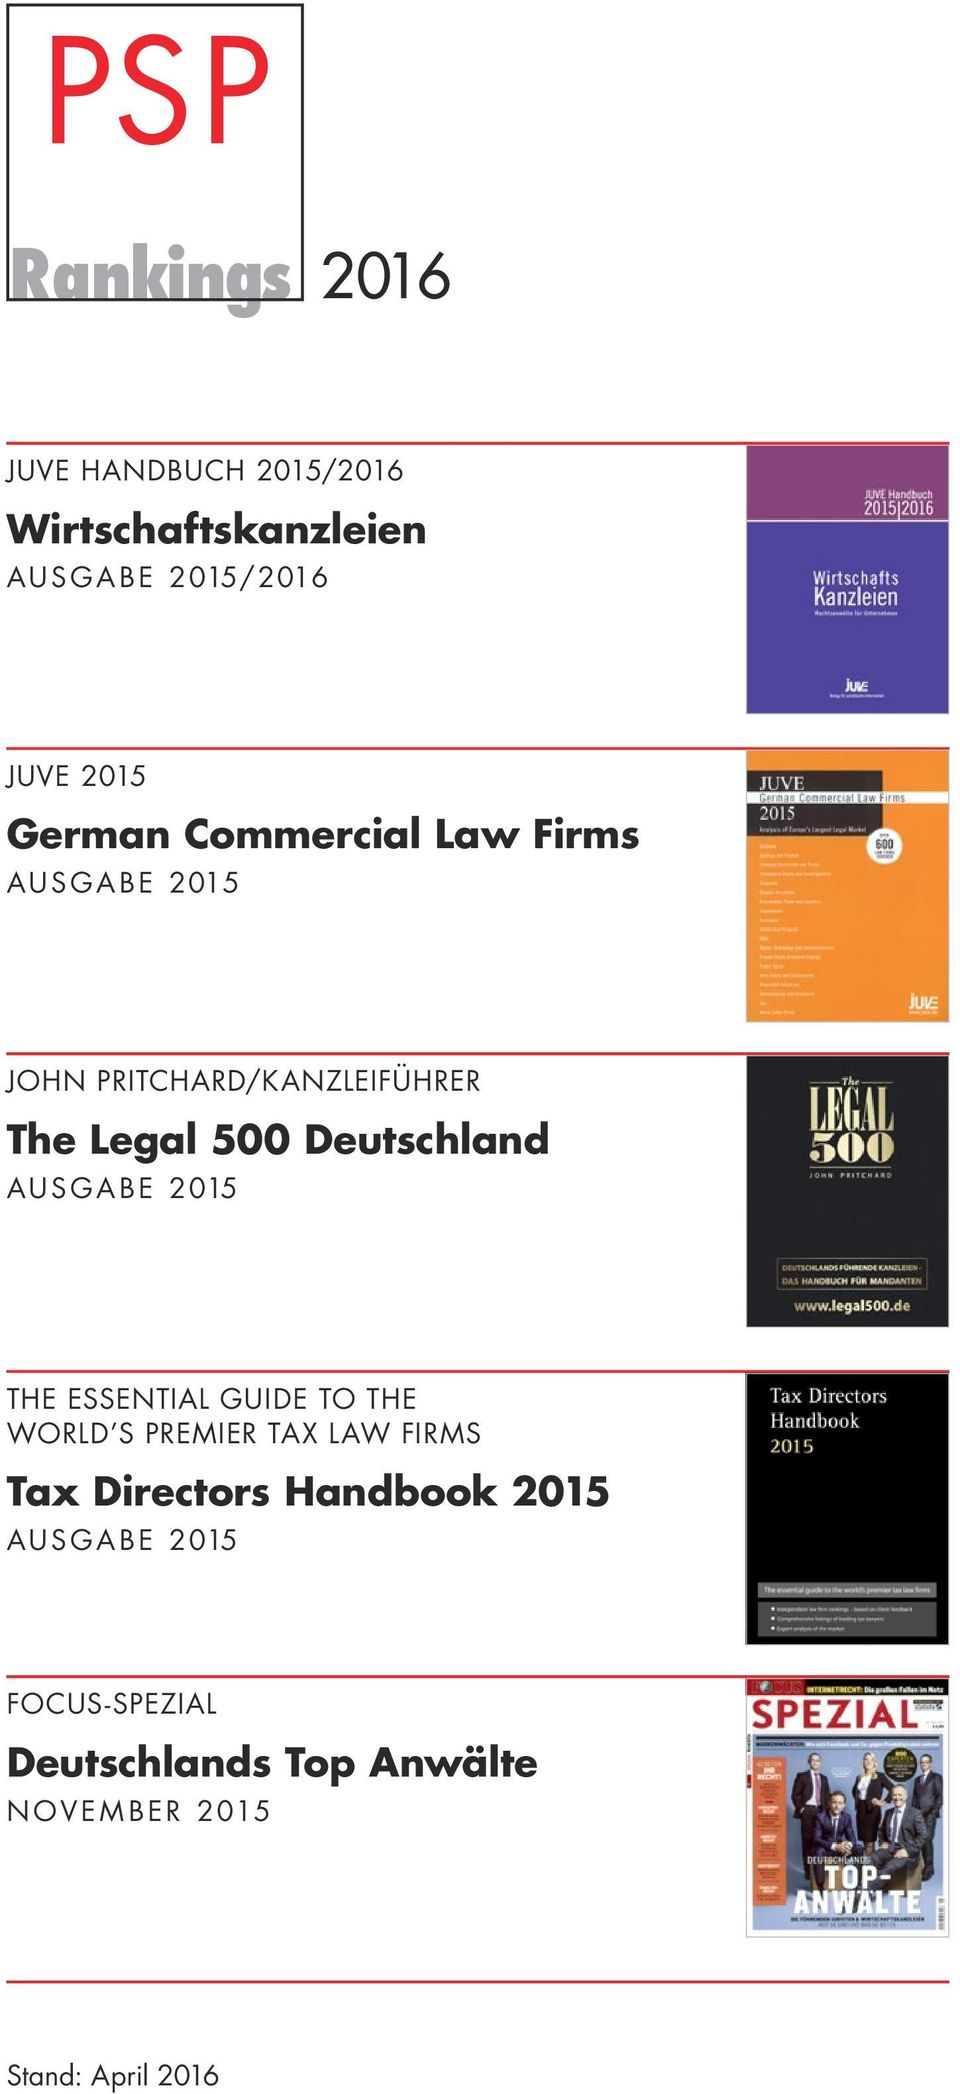 Deutschland A U S G A B E 2 015 THE ESSENTIAL GUIDE TO THE WORLD S PREMIER TAX LAW FIRMS Tax